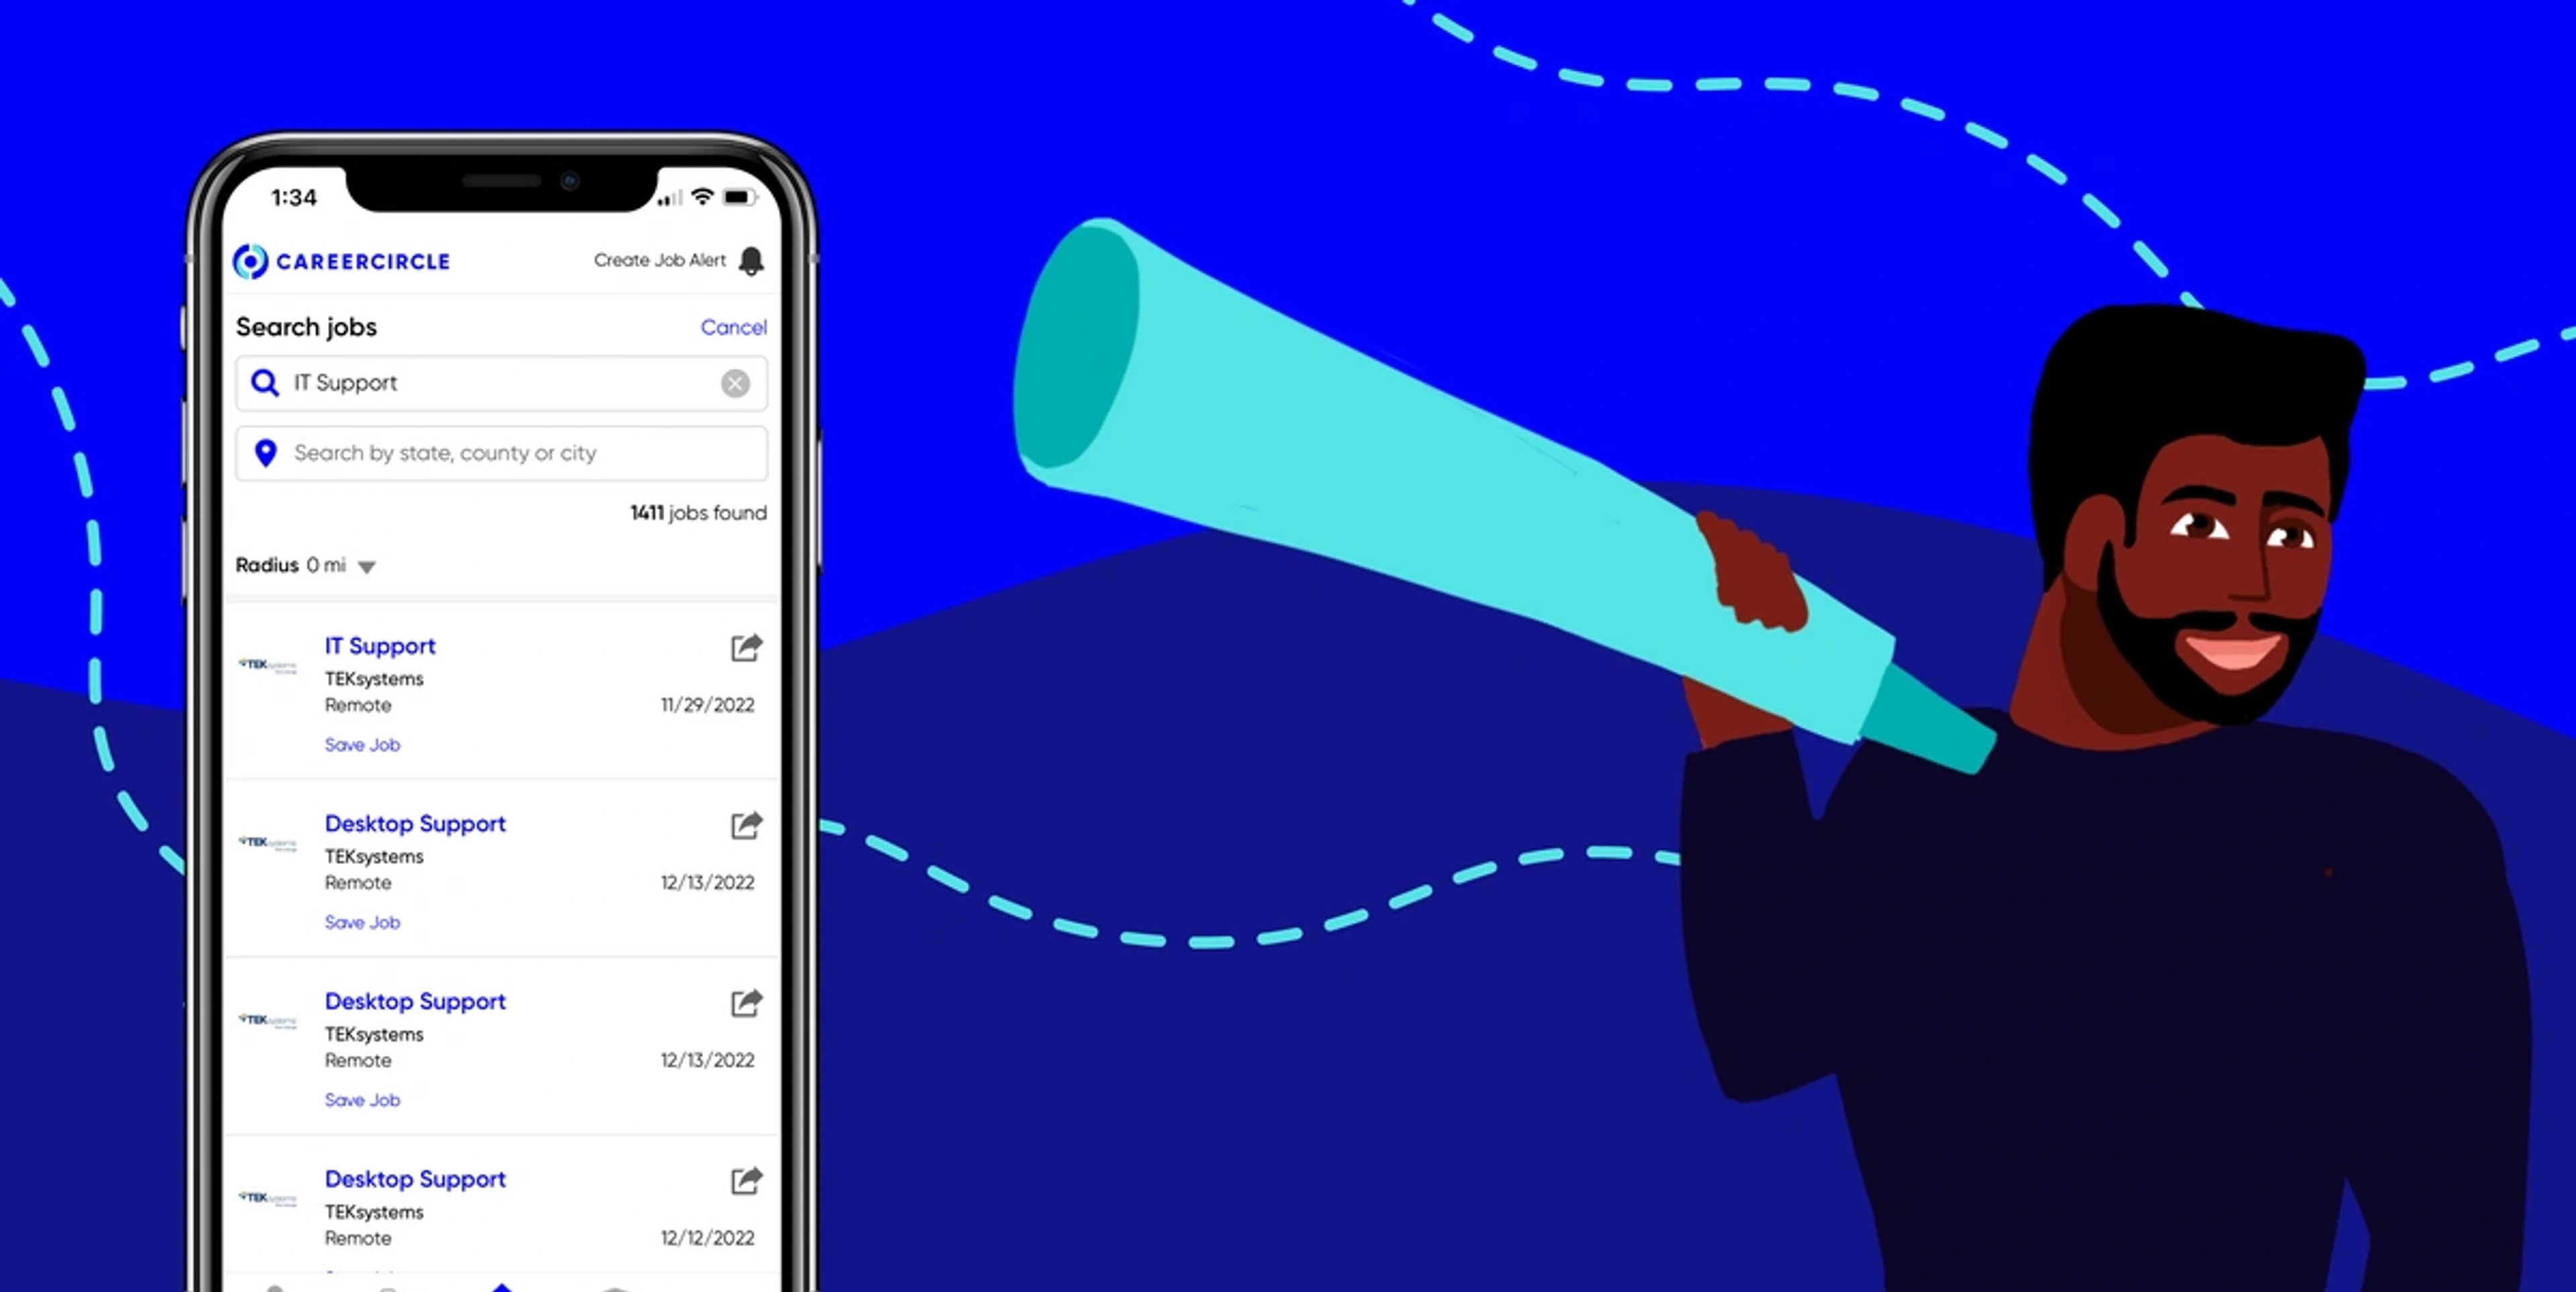 illustrated image with black man holding a telescope next to an AI image of the careercircle mobile app